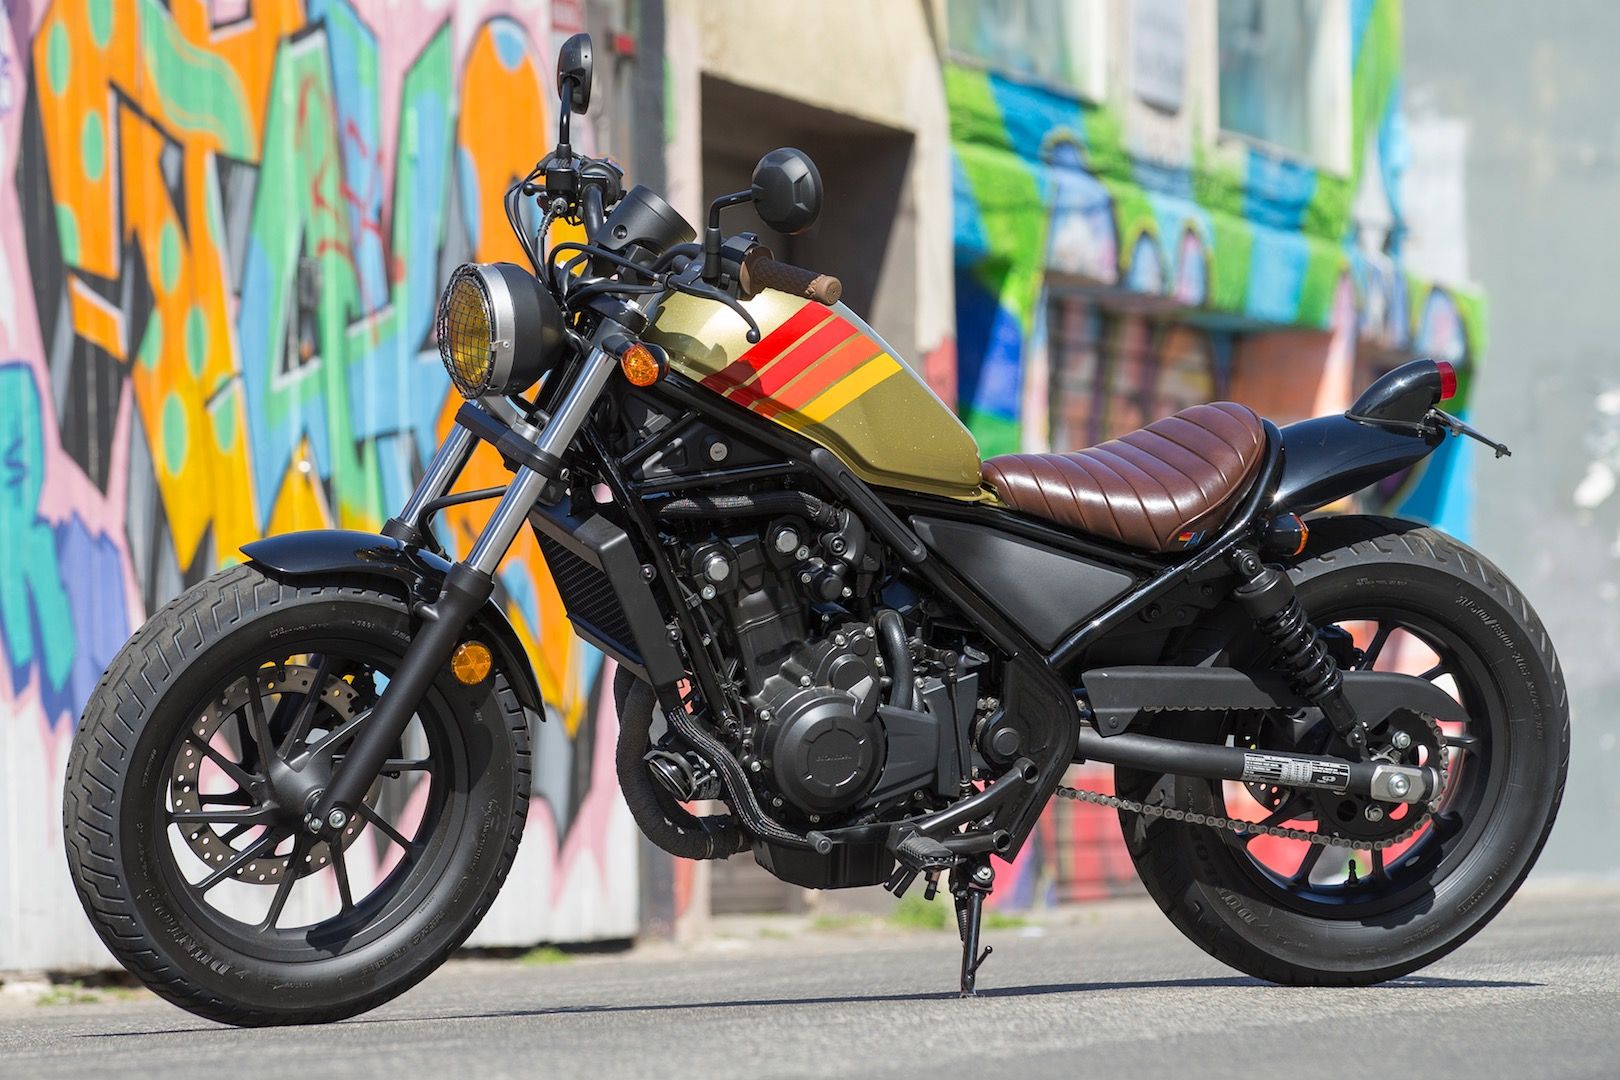 Here's What We Just Learned About The Honda Rebel 1100